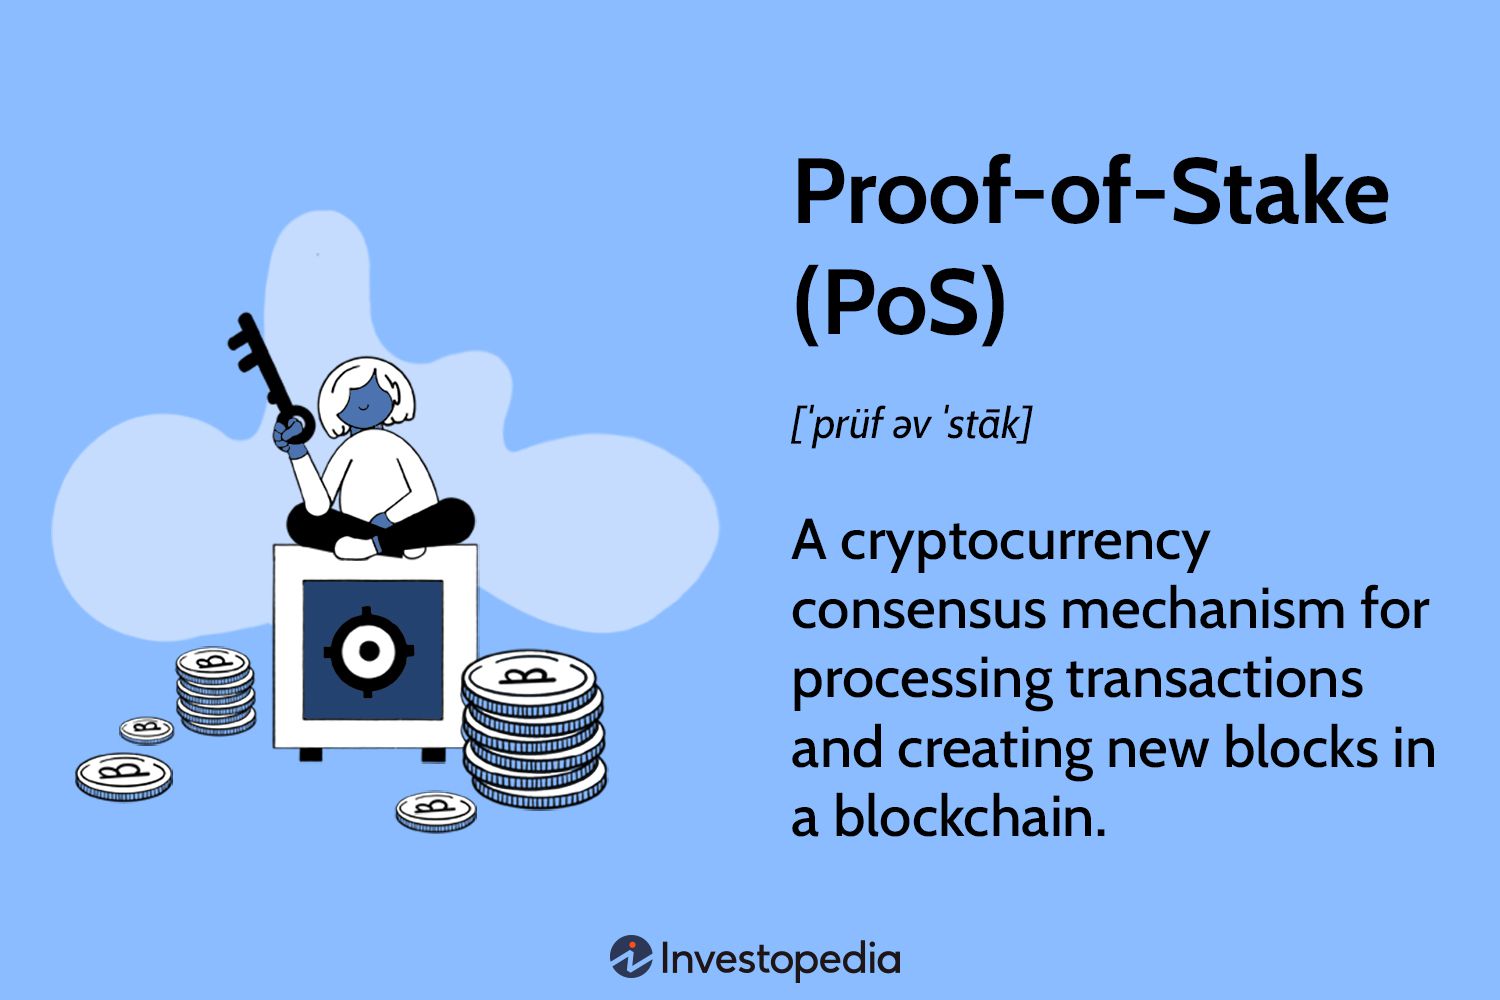 Proof of Stake vs. Delegated Proof of Stake | Gemini